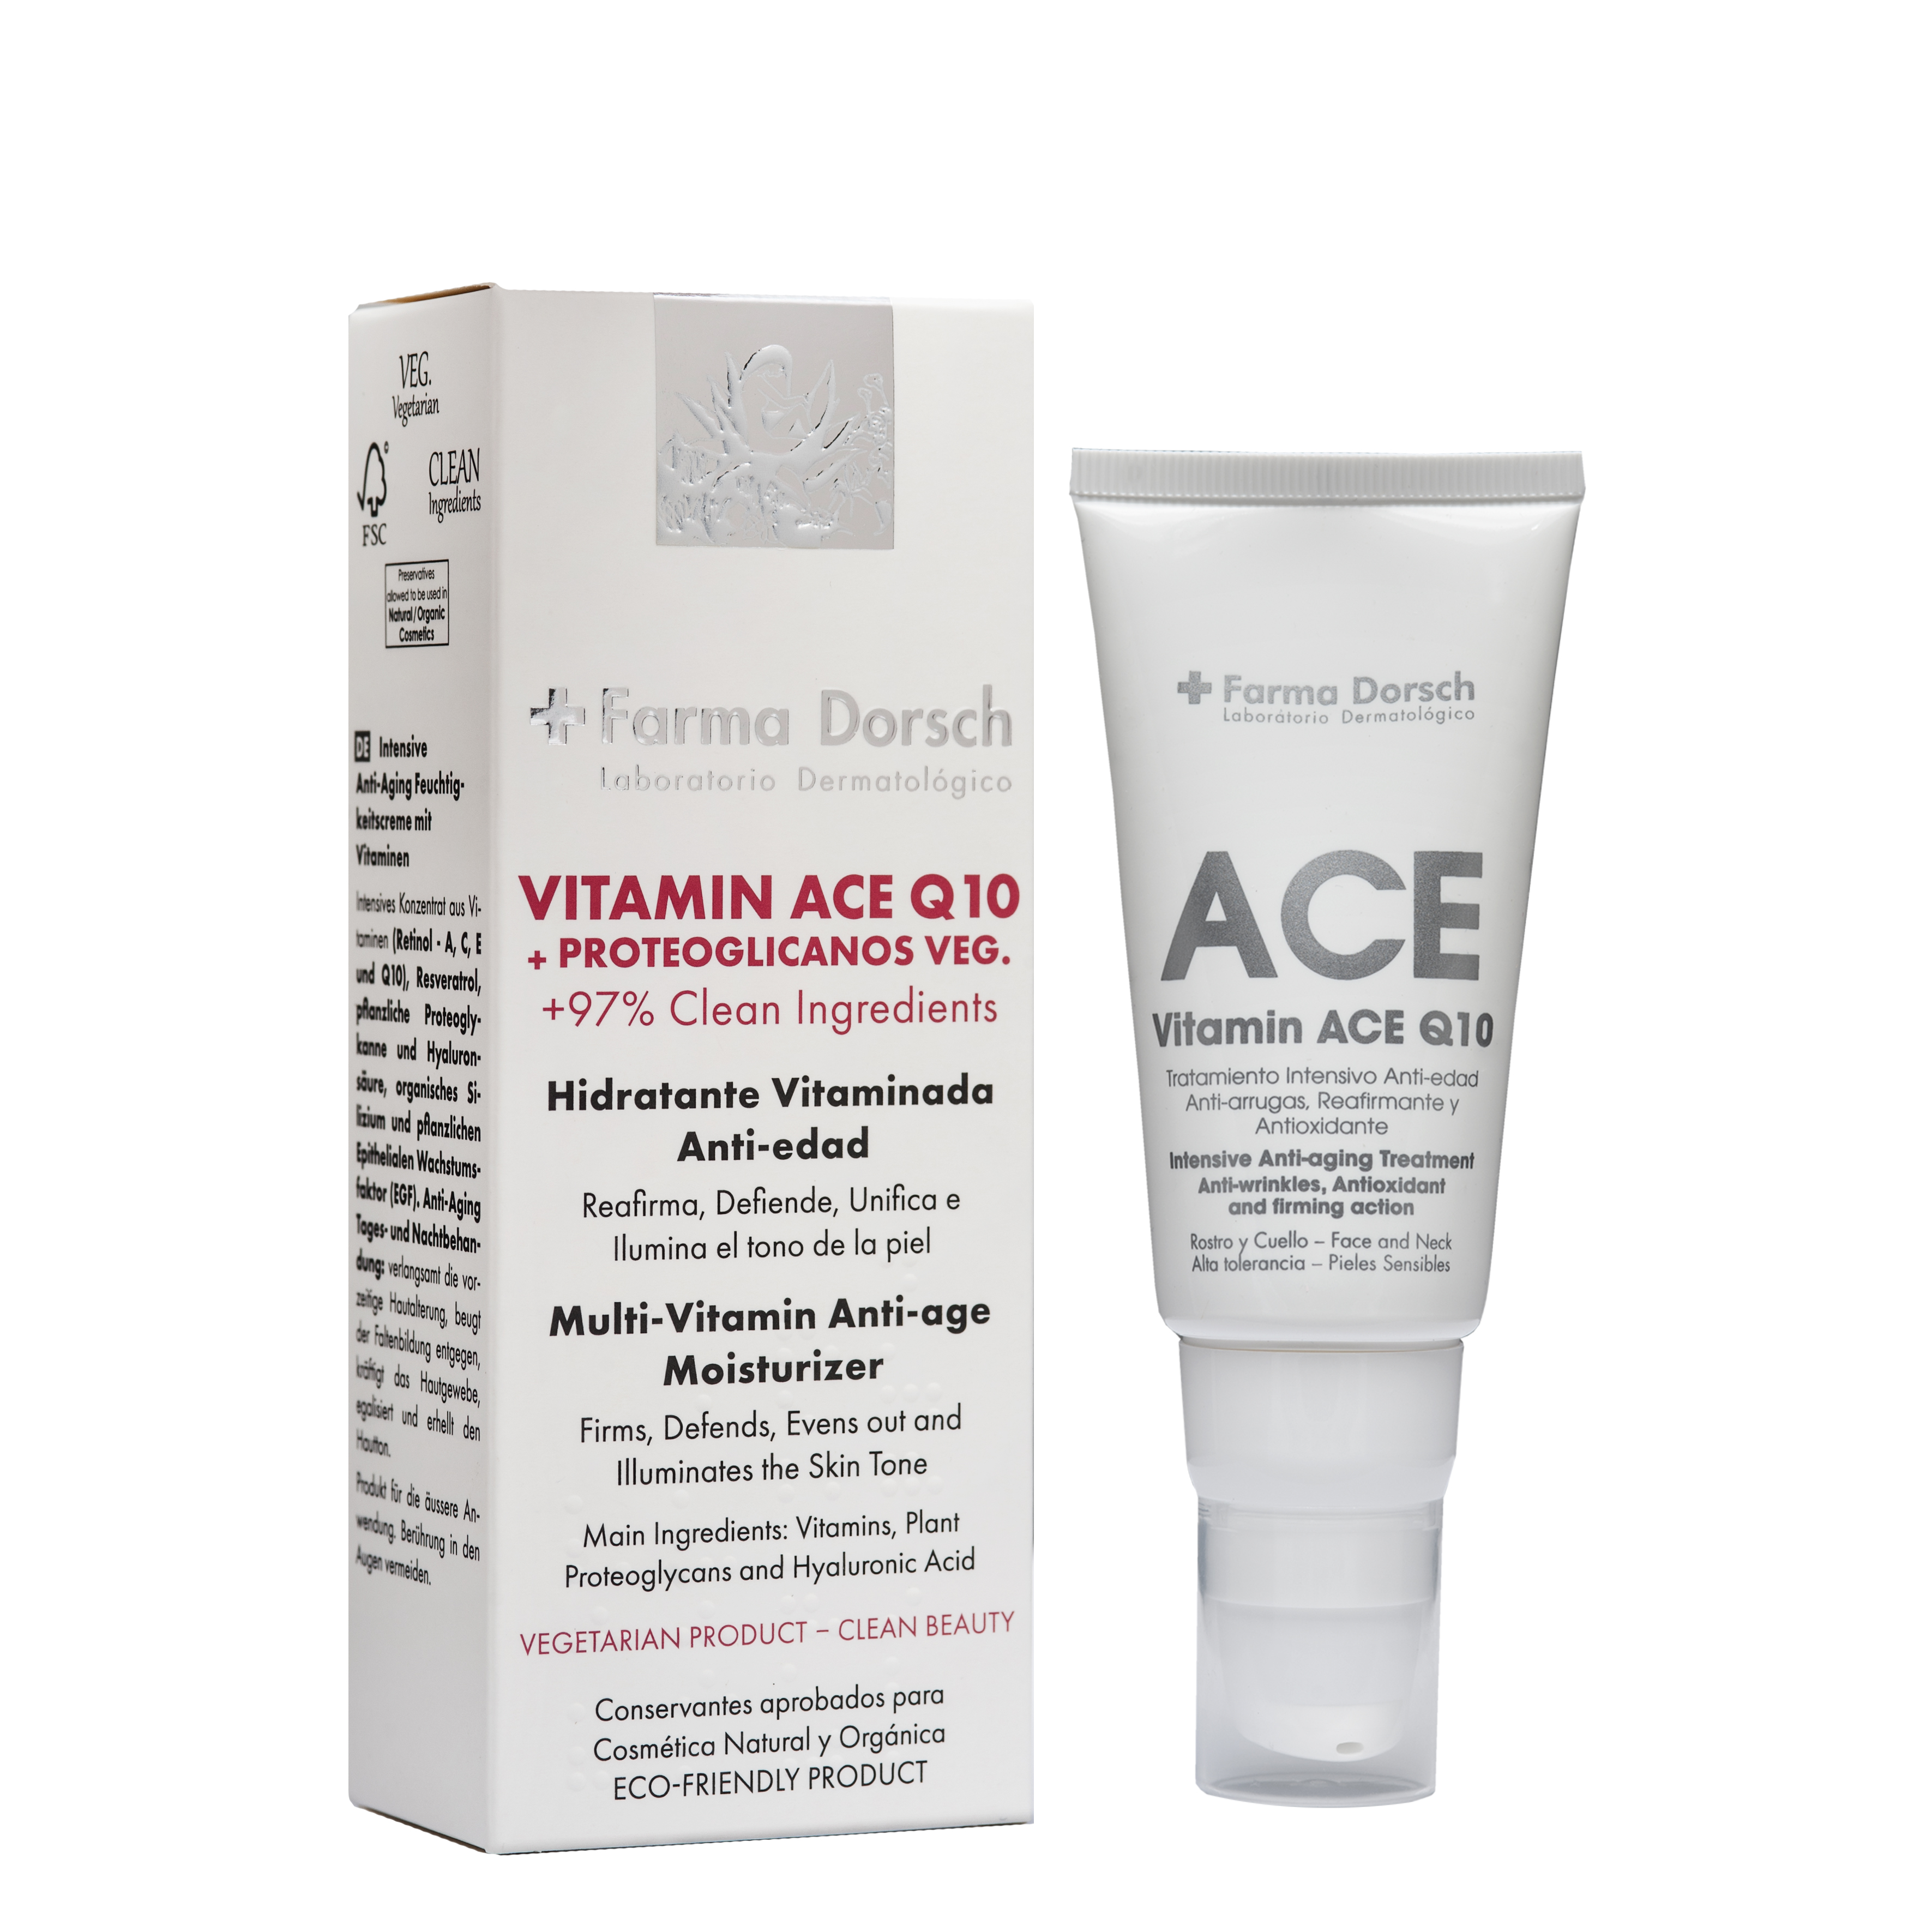 Vitamin ACE+Q10, from Farma Dorsch (€39), also contains retinol, vitamins C and E, resveratrol, hyaluronic acid and growth factors.